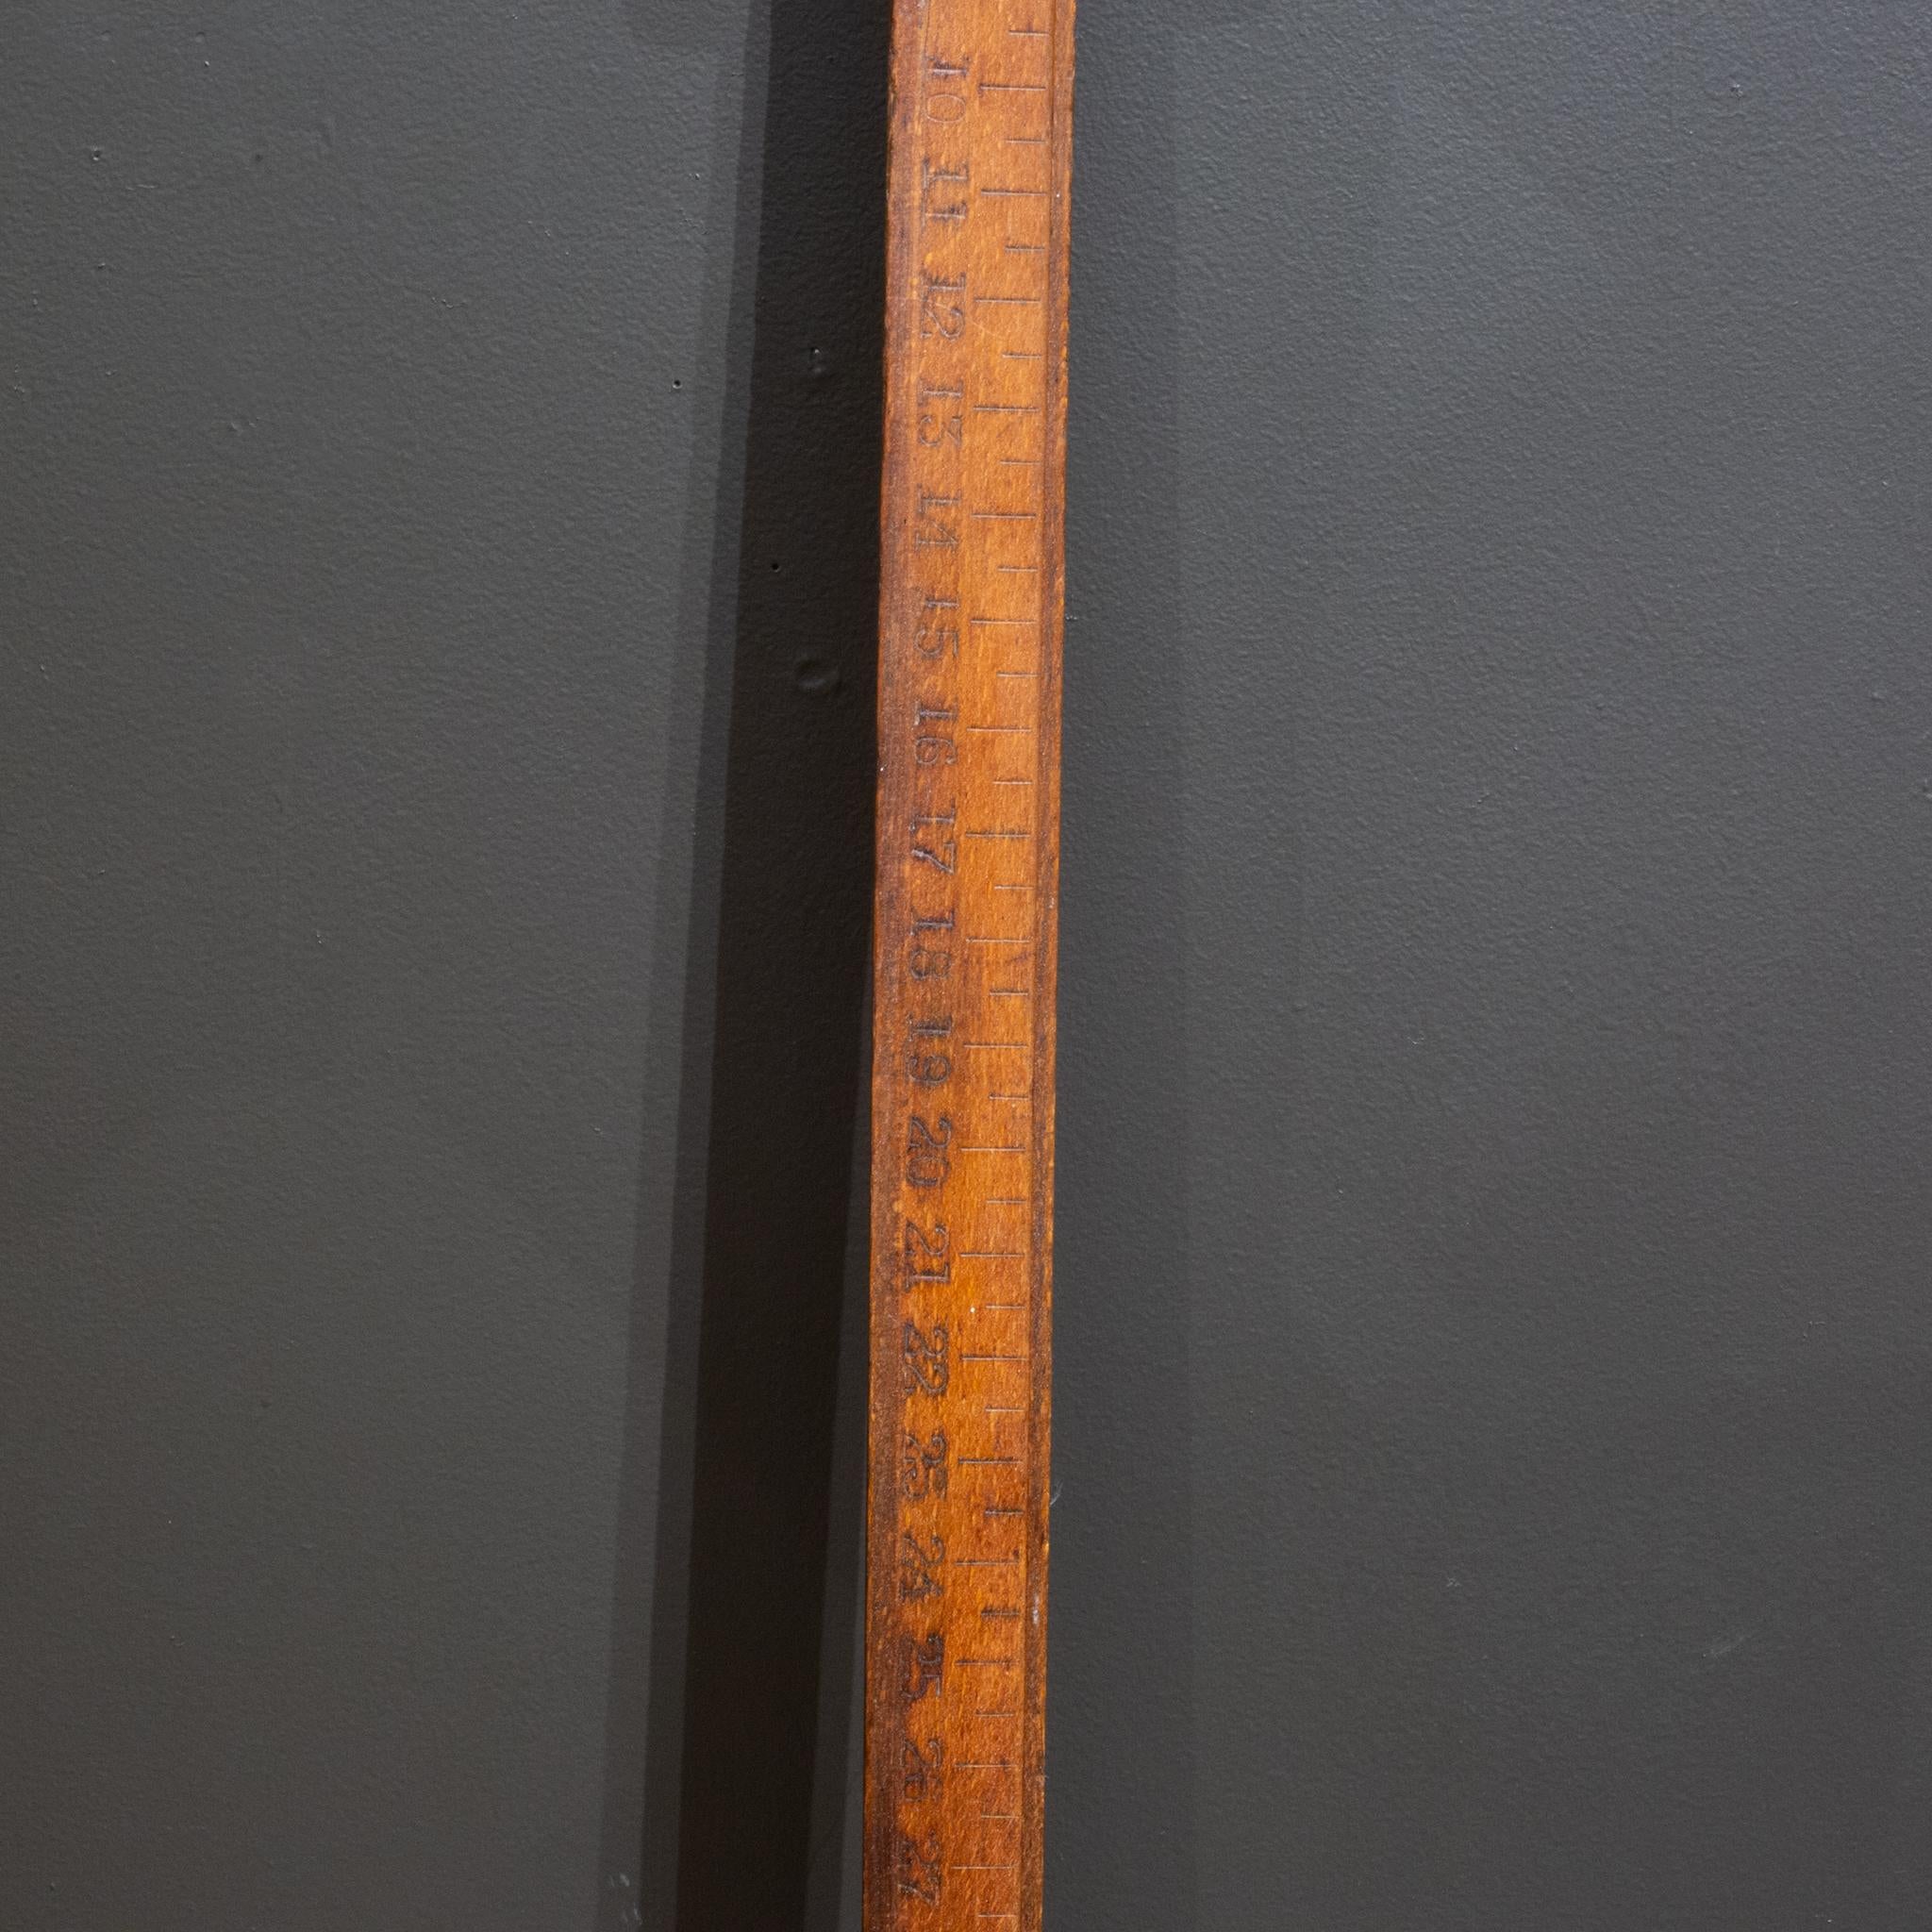 Wood Late 19th c. Antique Forester's Log Measuring Caliper, c.1890